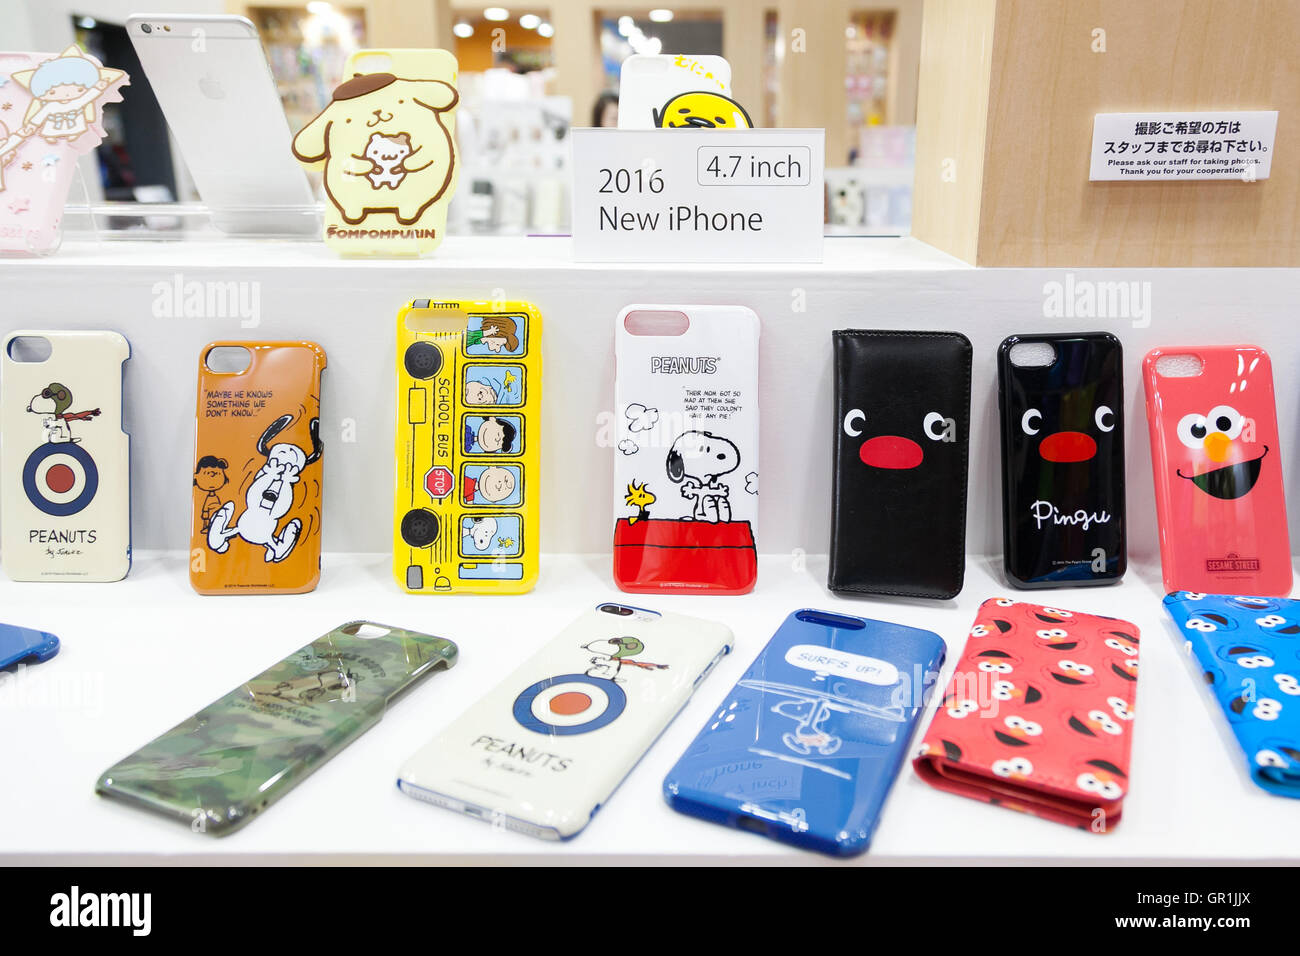 iPhone cases for Apple's new iPhone 7 smartphone, which is due to be announced today, on display at the Tokyo Gift Show exhibition on September 7, 2016, Tokyo, Japan. The 82nd Tokyo International Gift Show Autumn 2016 exhibition introduced Japanese and international goods from 2,729 companies, 686 of which came from 19 different countries outside of Japan, over three days from September 7th to 9th at Tokyo Big Sight. (Photo by Rodrigo Reyes Marin/AFLO) Stock Photo